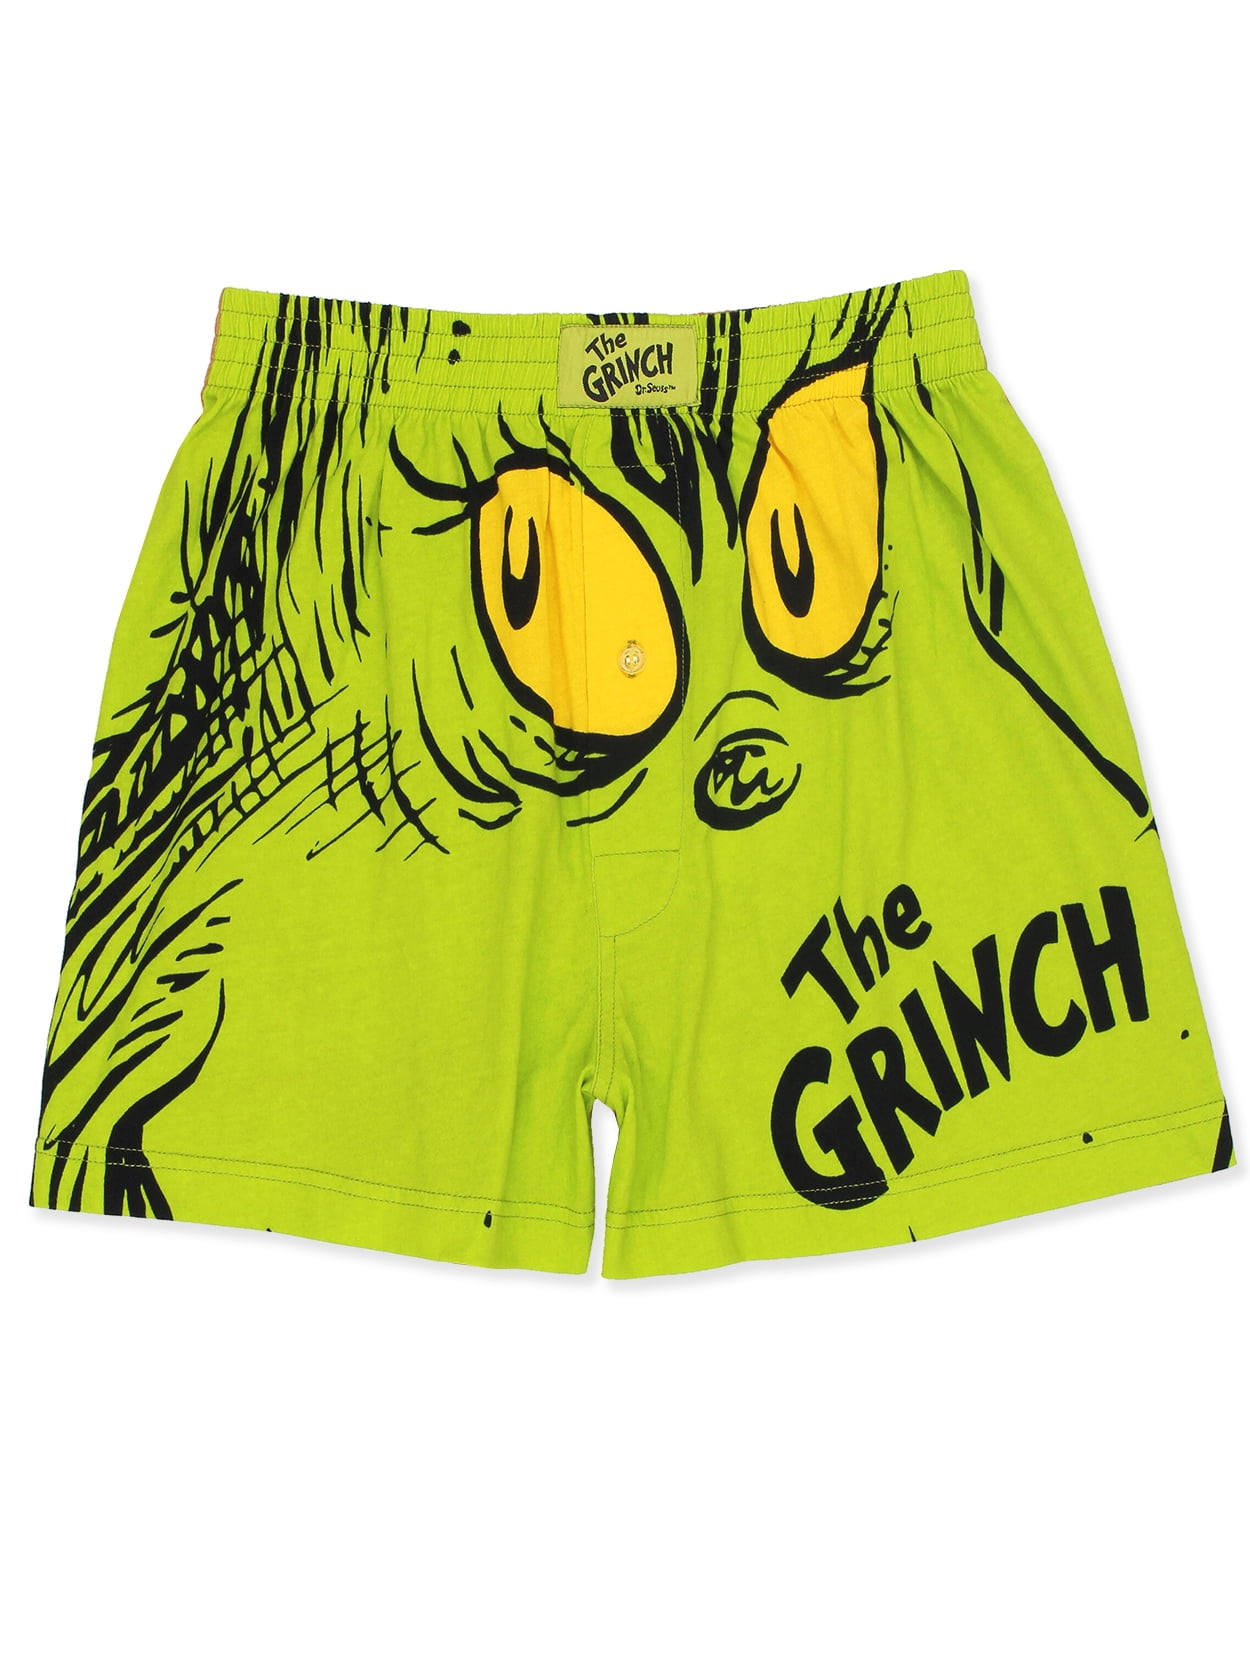 Grinch Mens Boxers